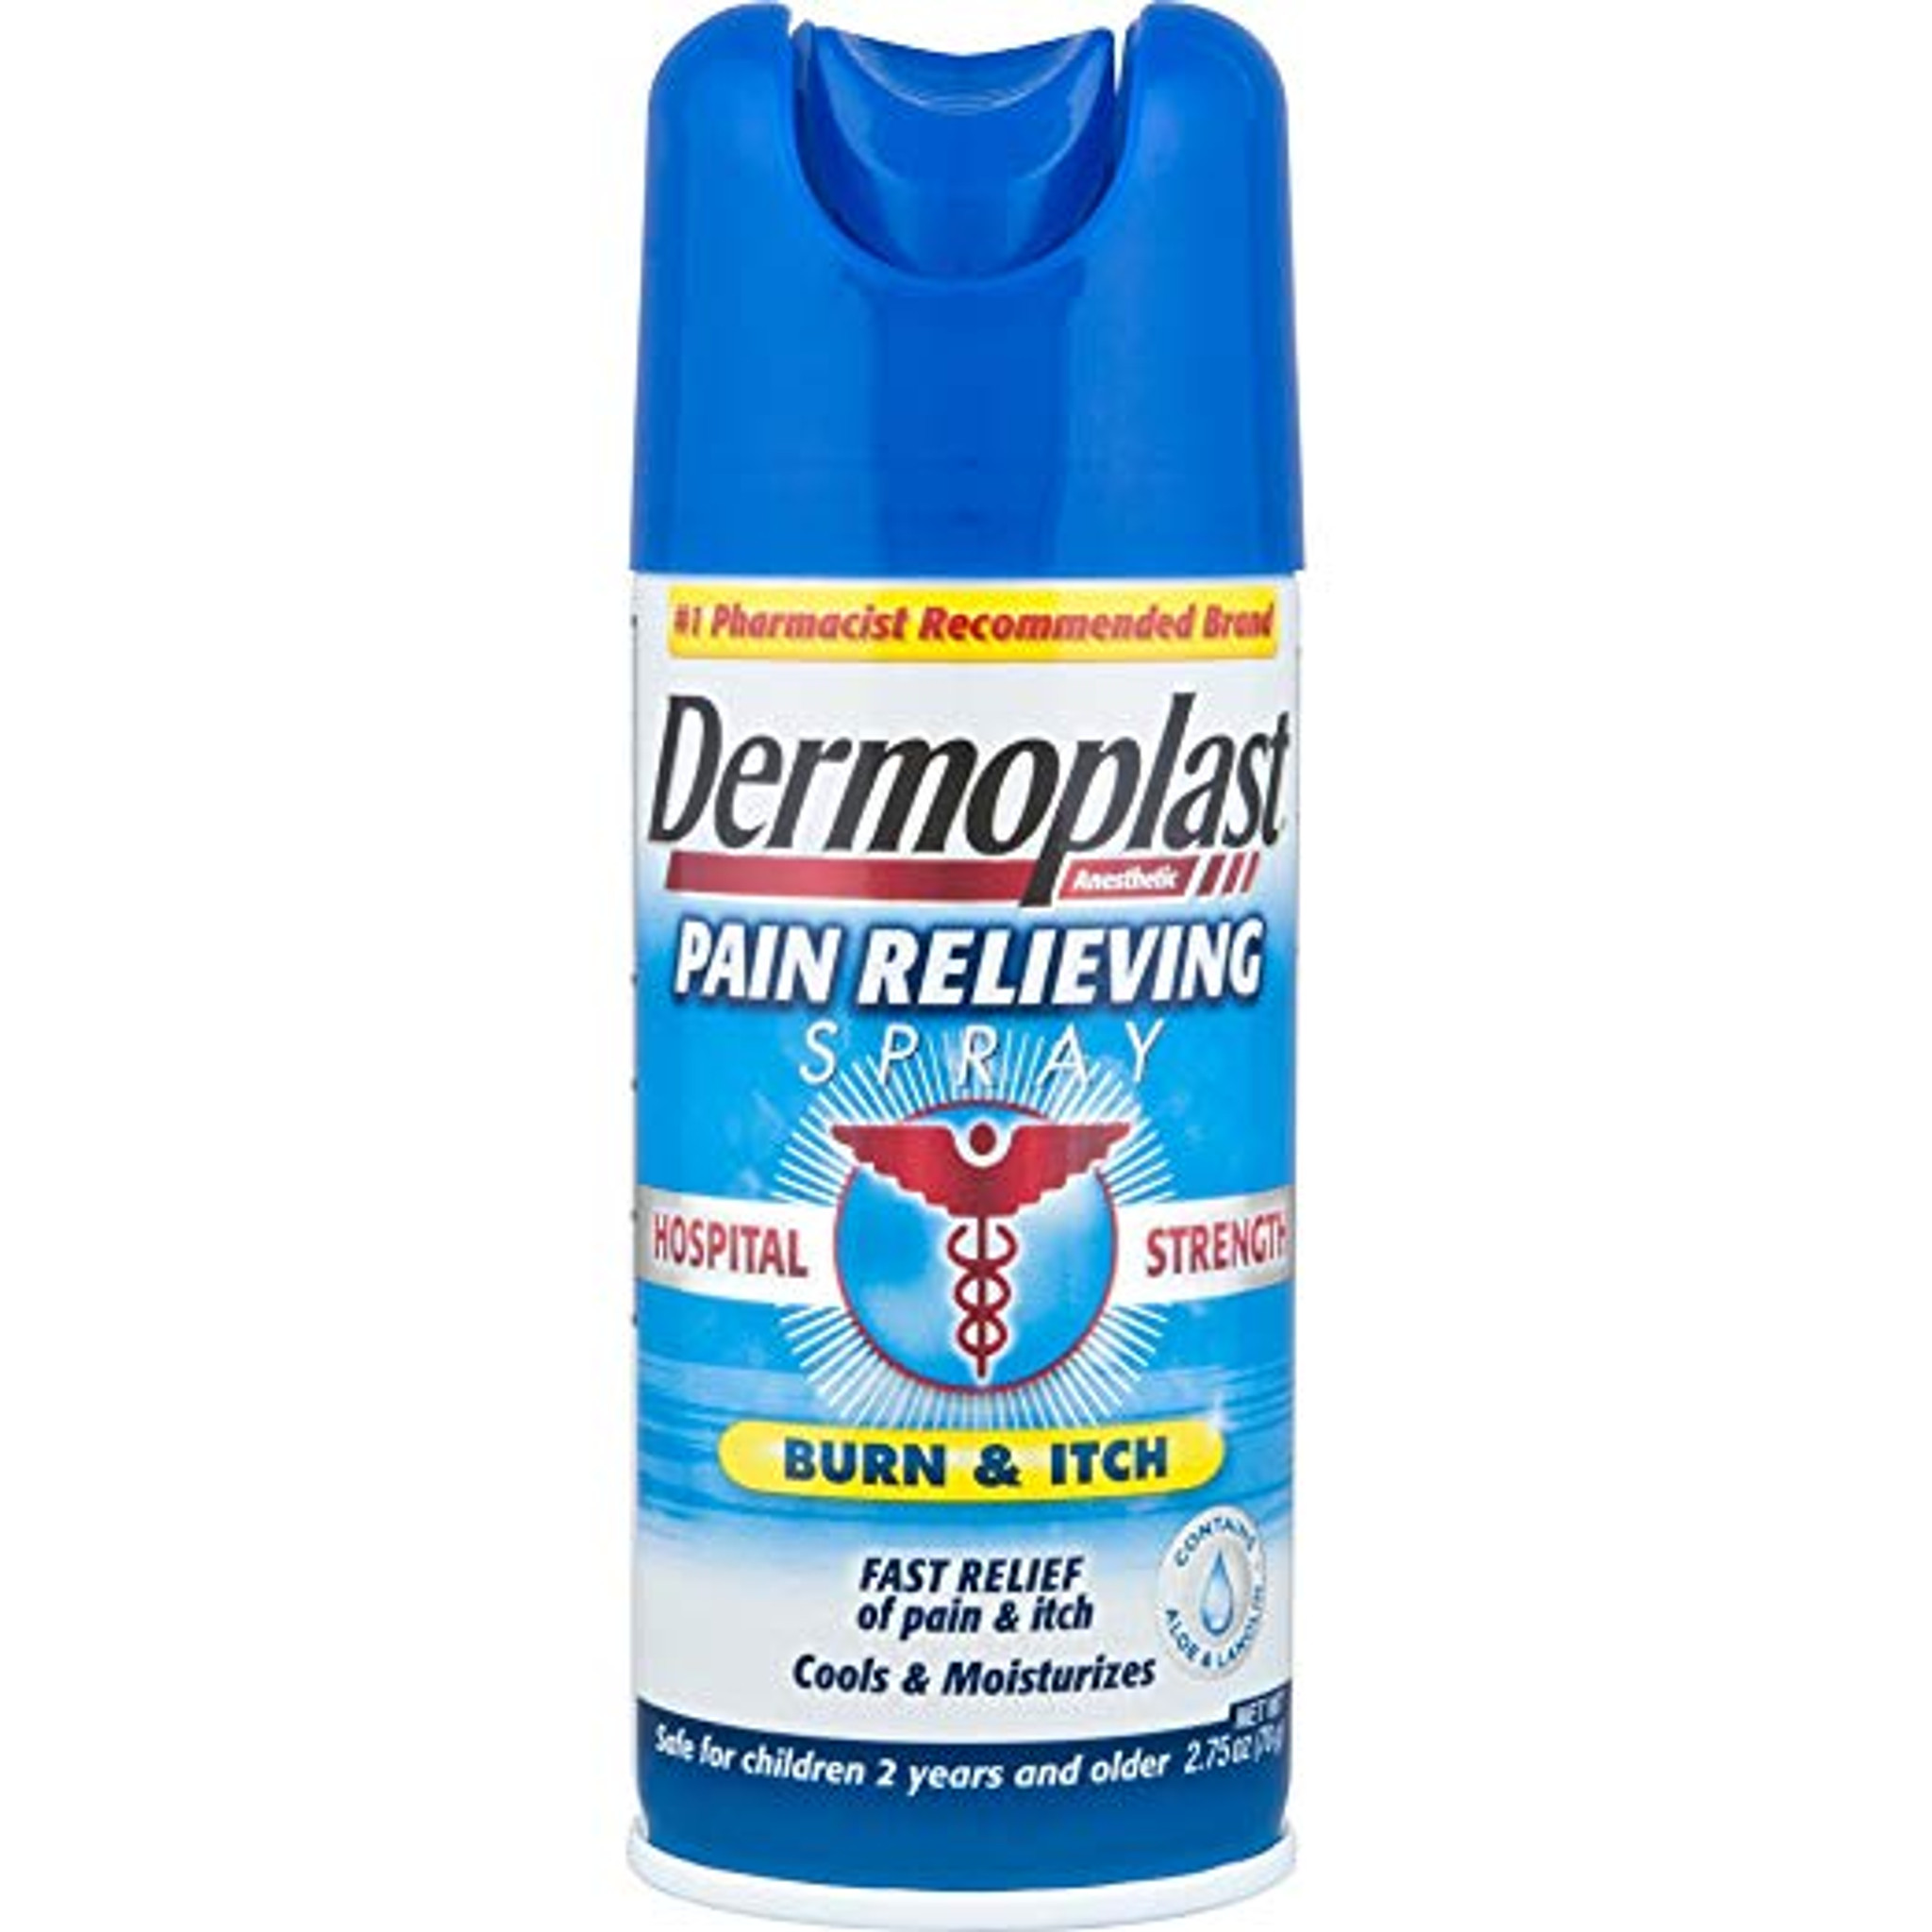 https://cdn11.bigcommerce.com/s-79bvd/images/stencil/2048x2048/products/13565/27375/Dermoplast_Hospital_Strength_Pain_Relieving_Spray_for_Minor_Cuts_Burns_Scrapes_Insect_Bites_Blisters_Sunburn_Minor_Burns_and_Other_Minor_Skin_Irritations_20__Benzocaine_0.05_Menthol_2.75oz_1__39073.1586691888.jpg?c=2